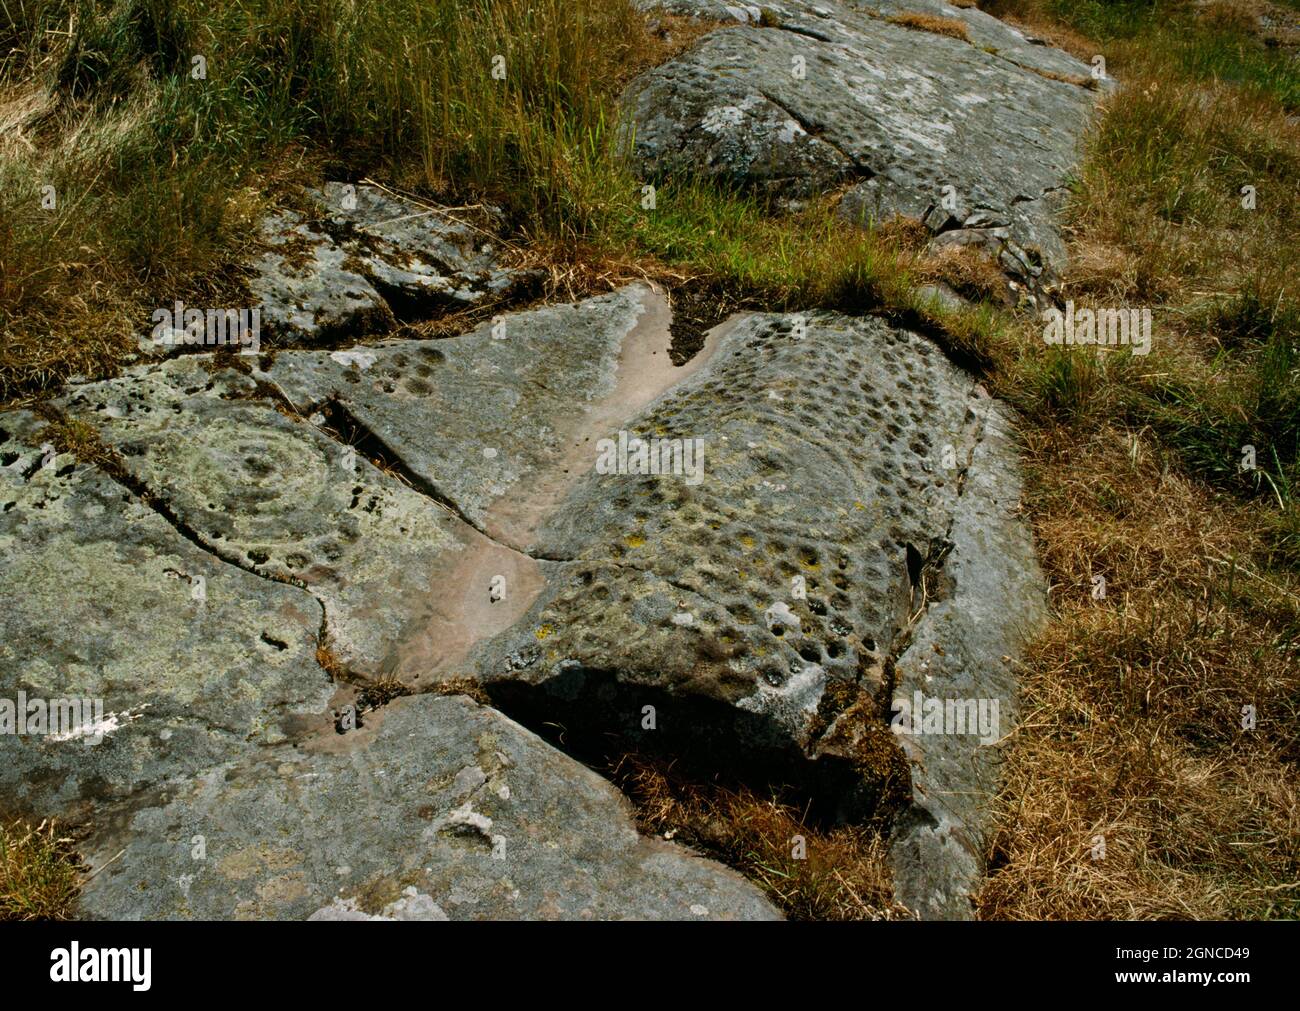 View SSW of prehistoric rock carvings at High Banks Farm, Dumfries and Galloway, Scotland, UK, showing numerous cupmarks surrounding cups-and-rings. Stock Photo